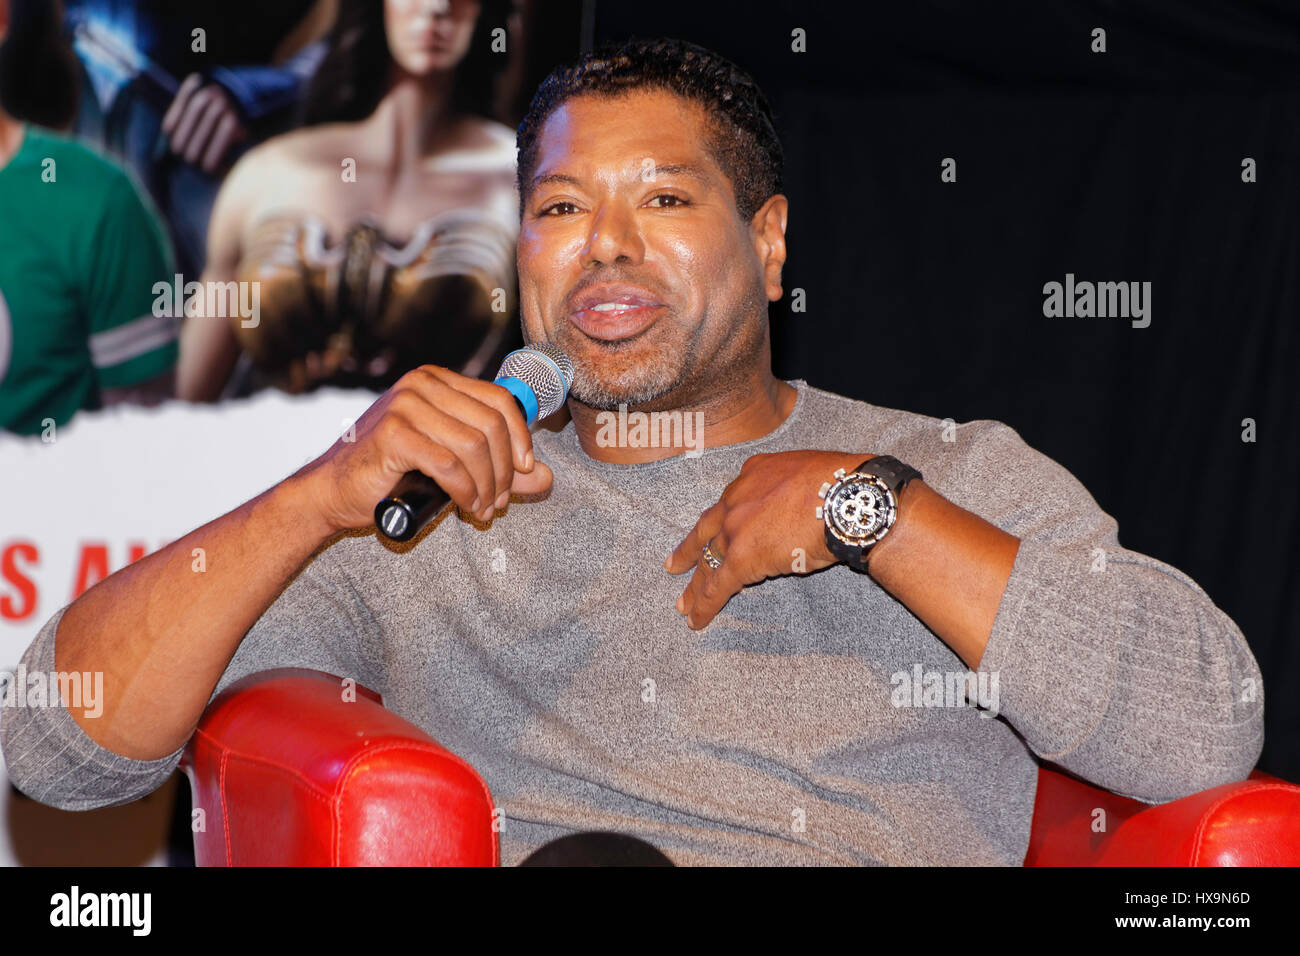 Christopher Judge  what happened to him?